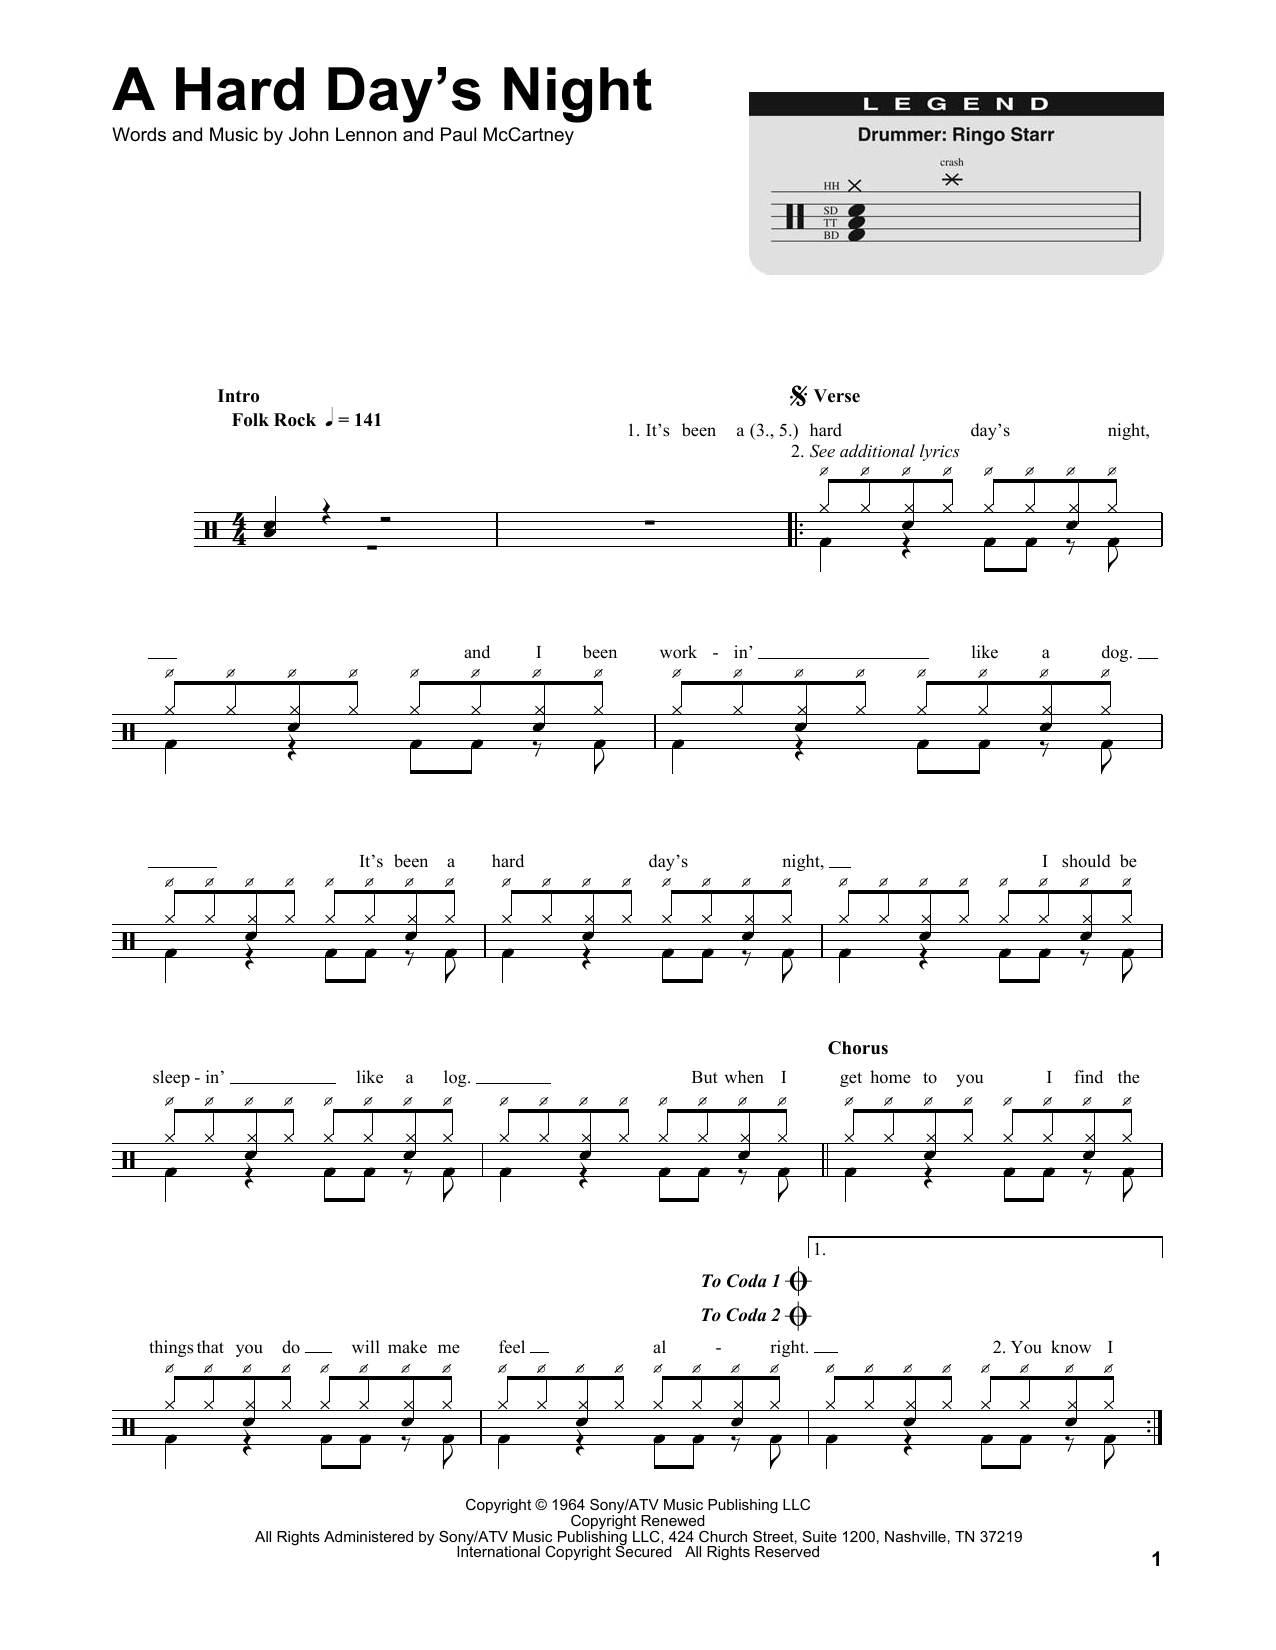 Download The Beatles A Hard Day's Night Sheet Music